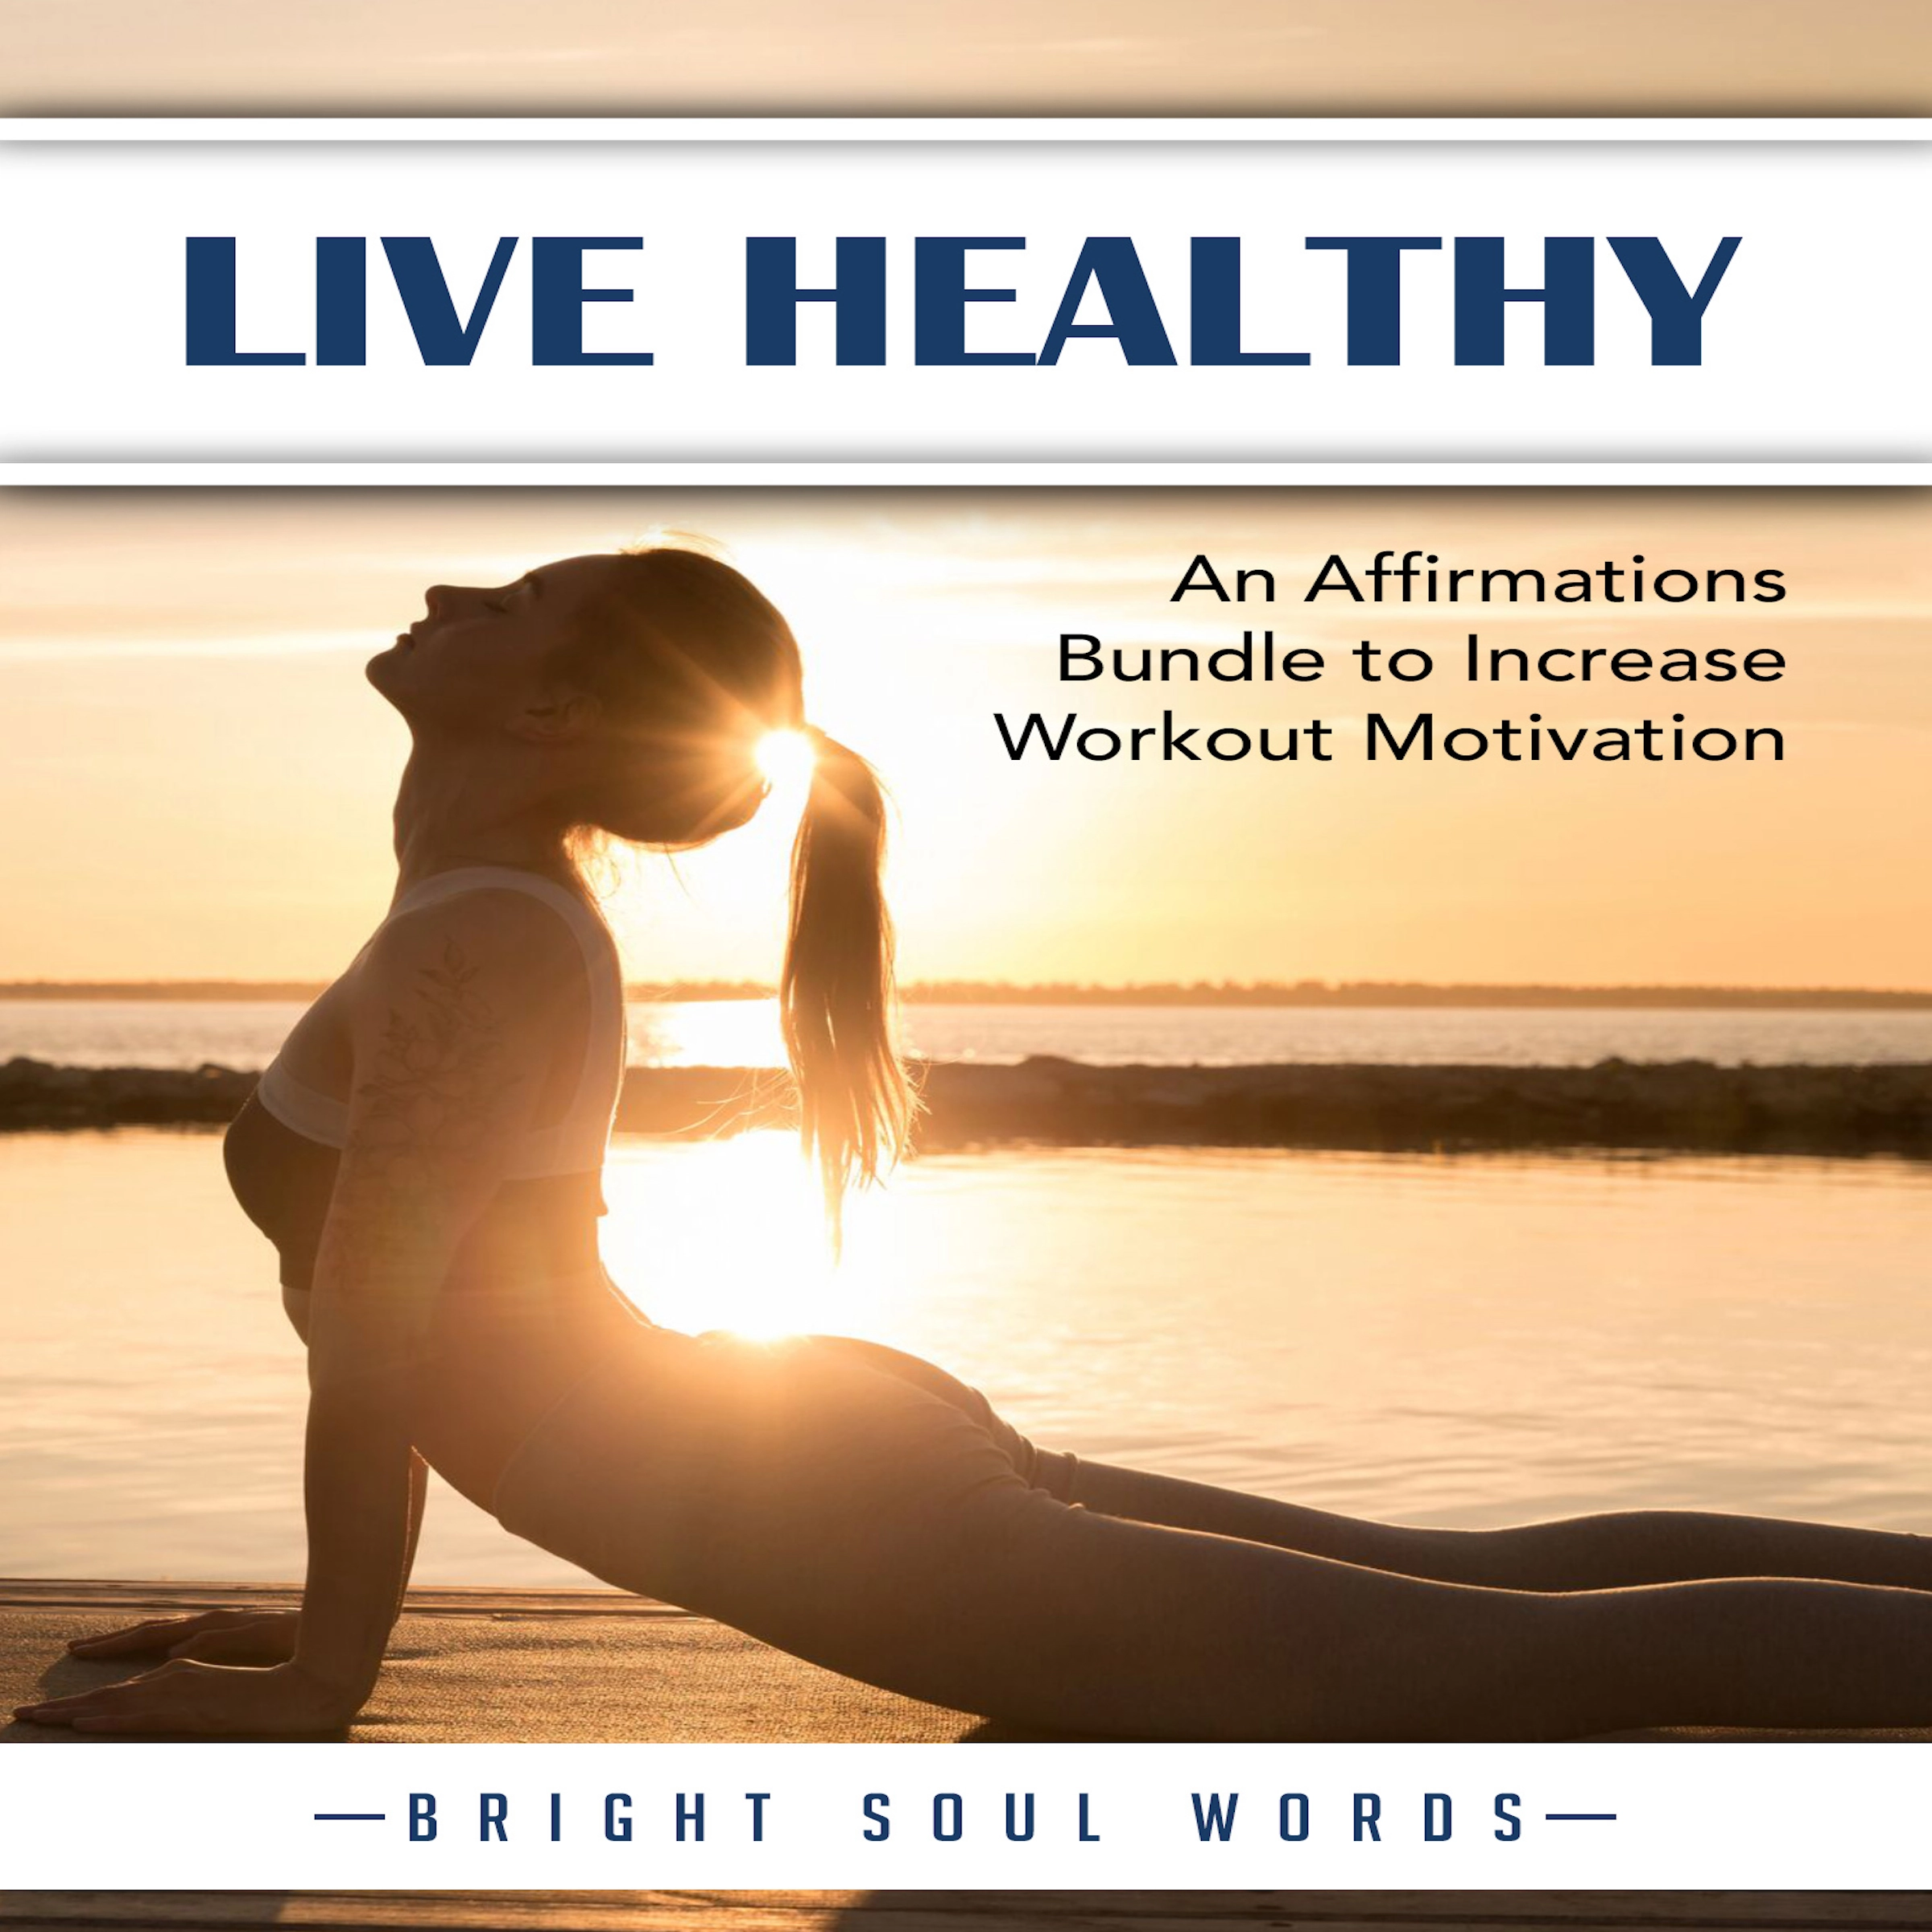 Live Healthy: An Affirmations Bundle to Increase Workout Motivation Audiobook by Bright Soul Words